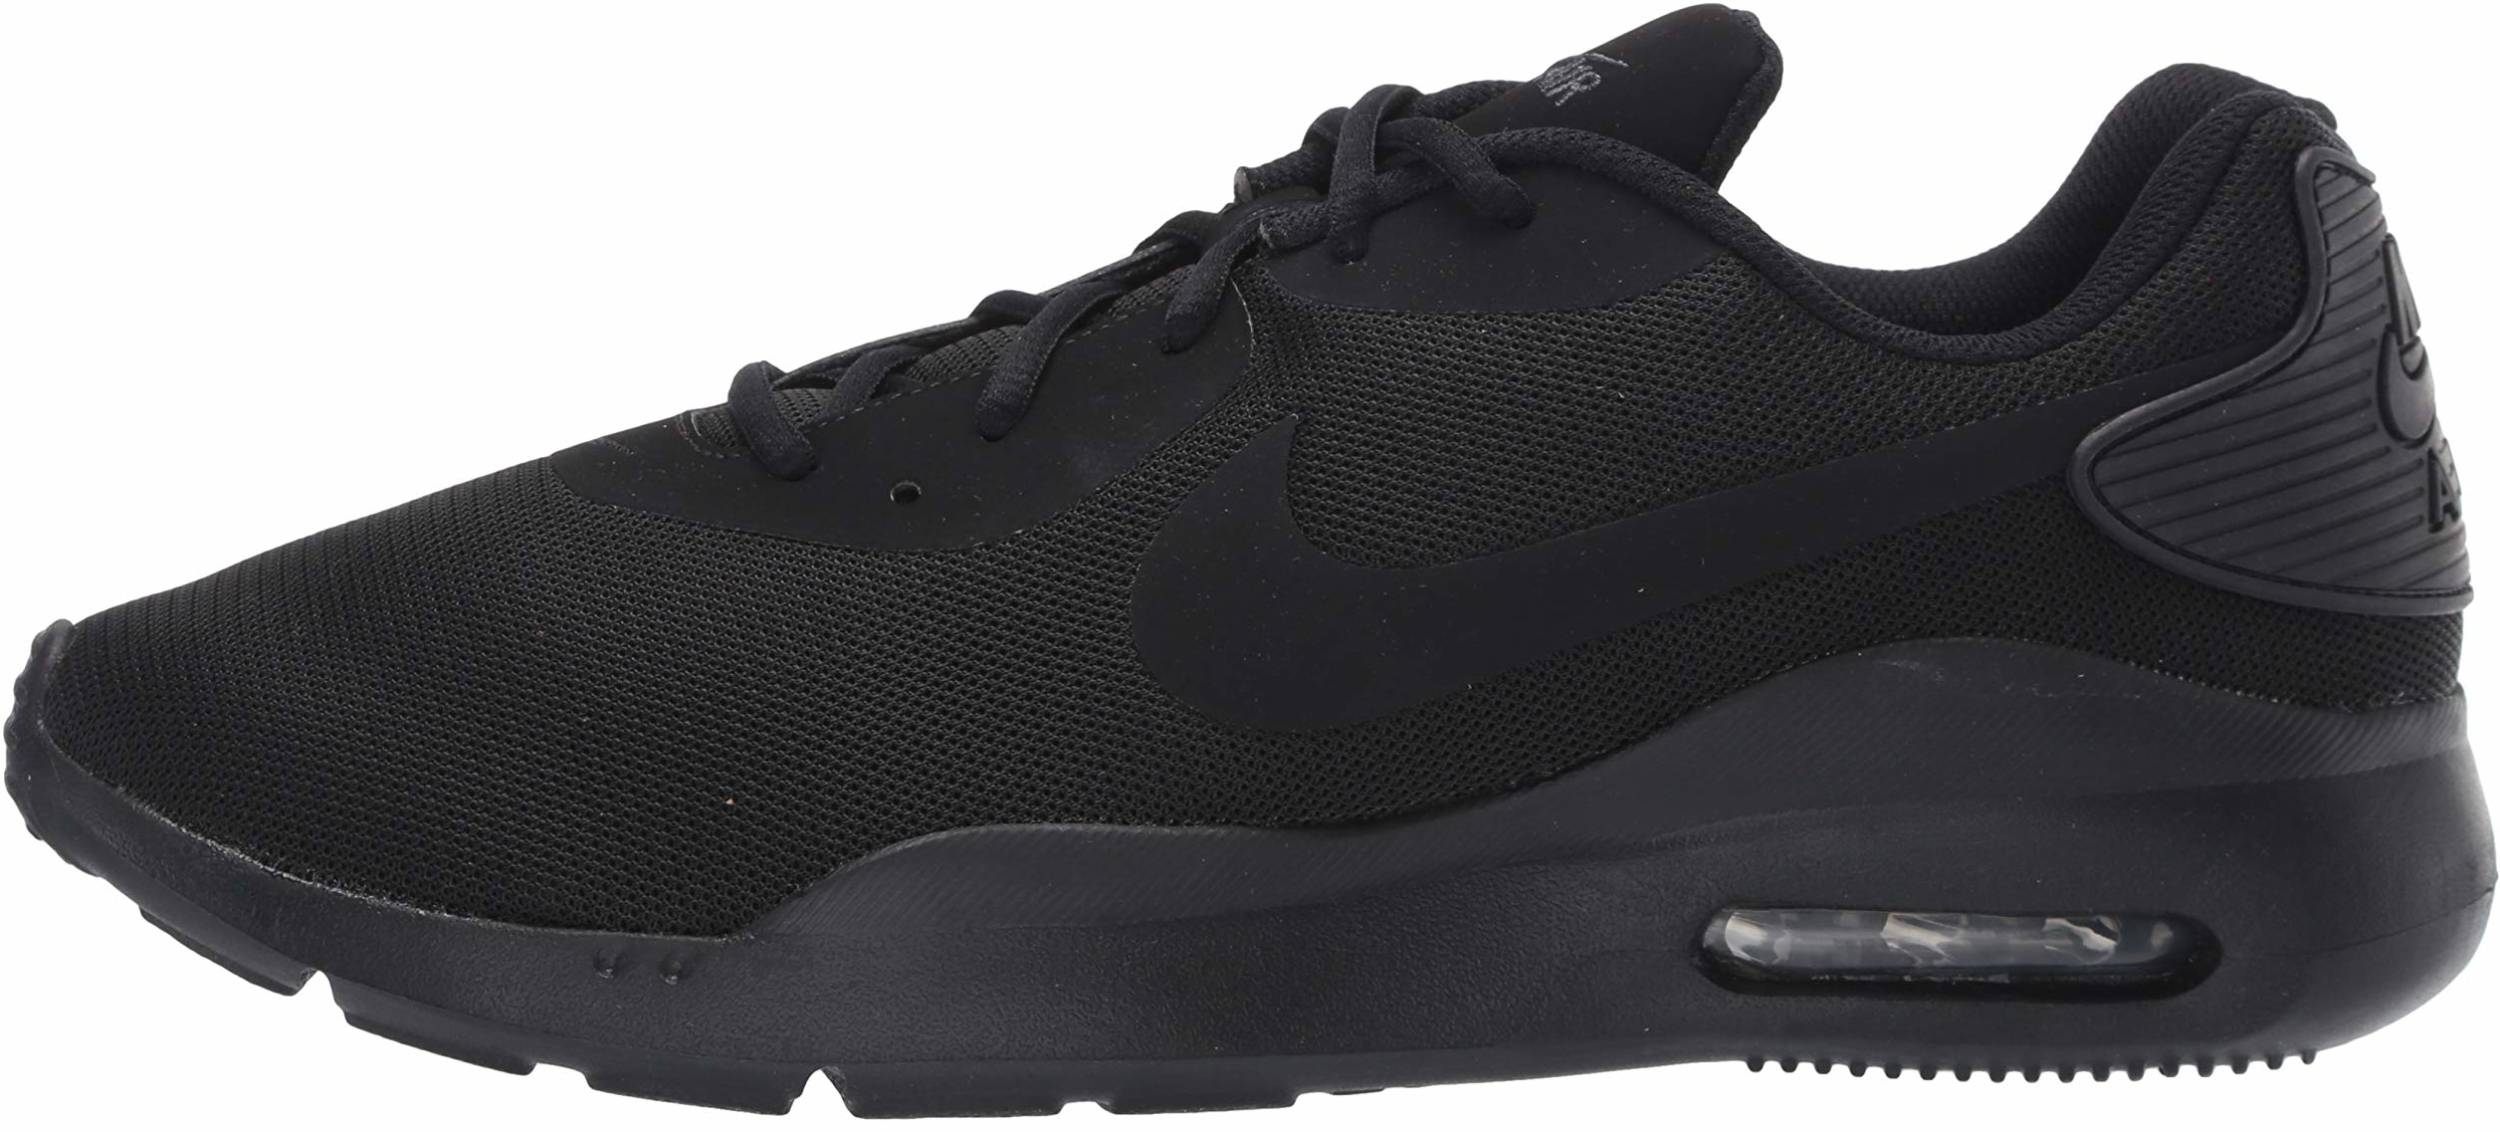 Only $51 + Review of Nike Air Max Oketo 